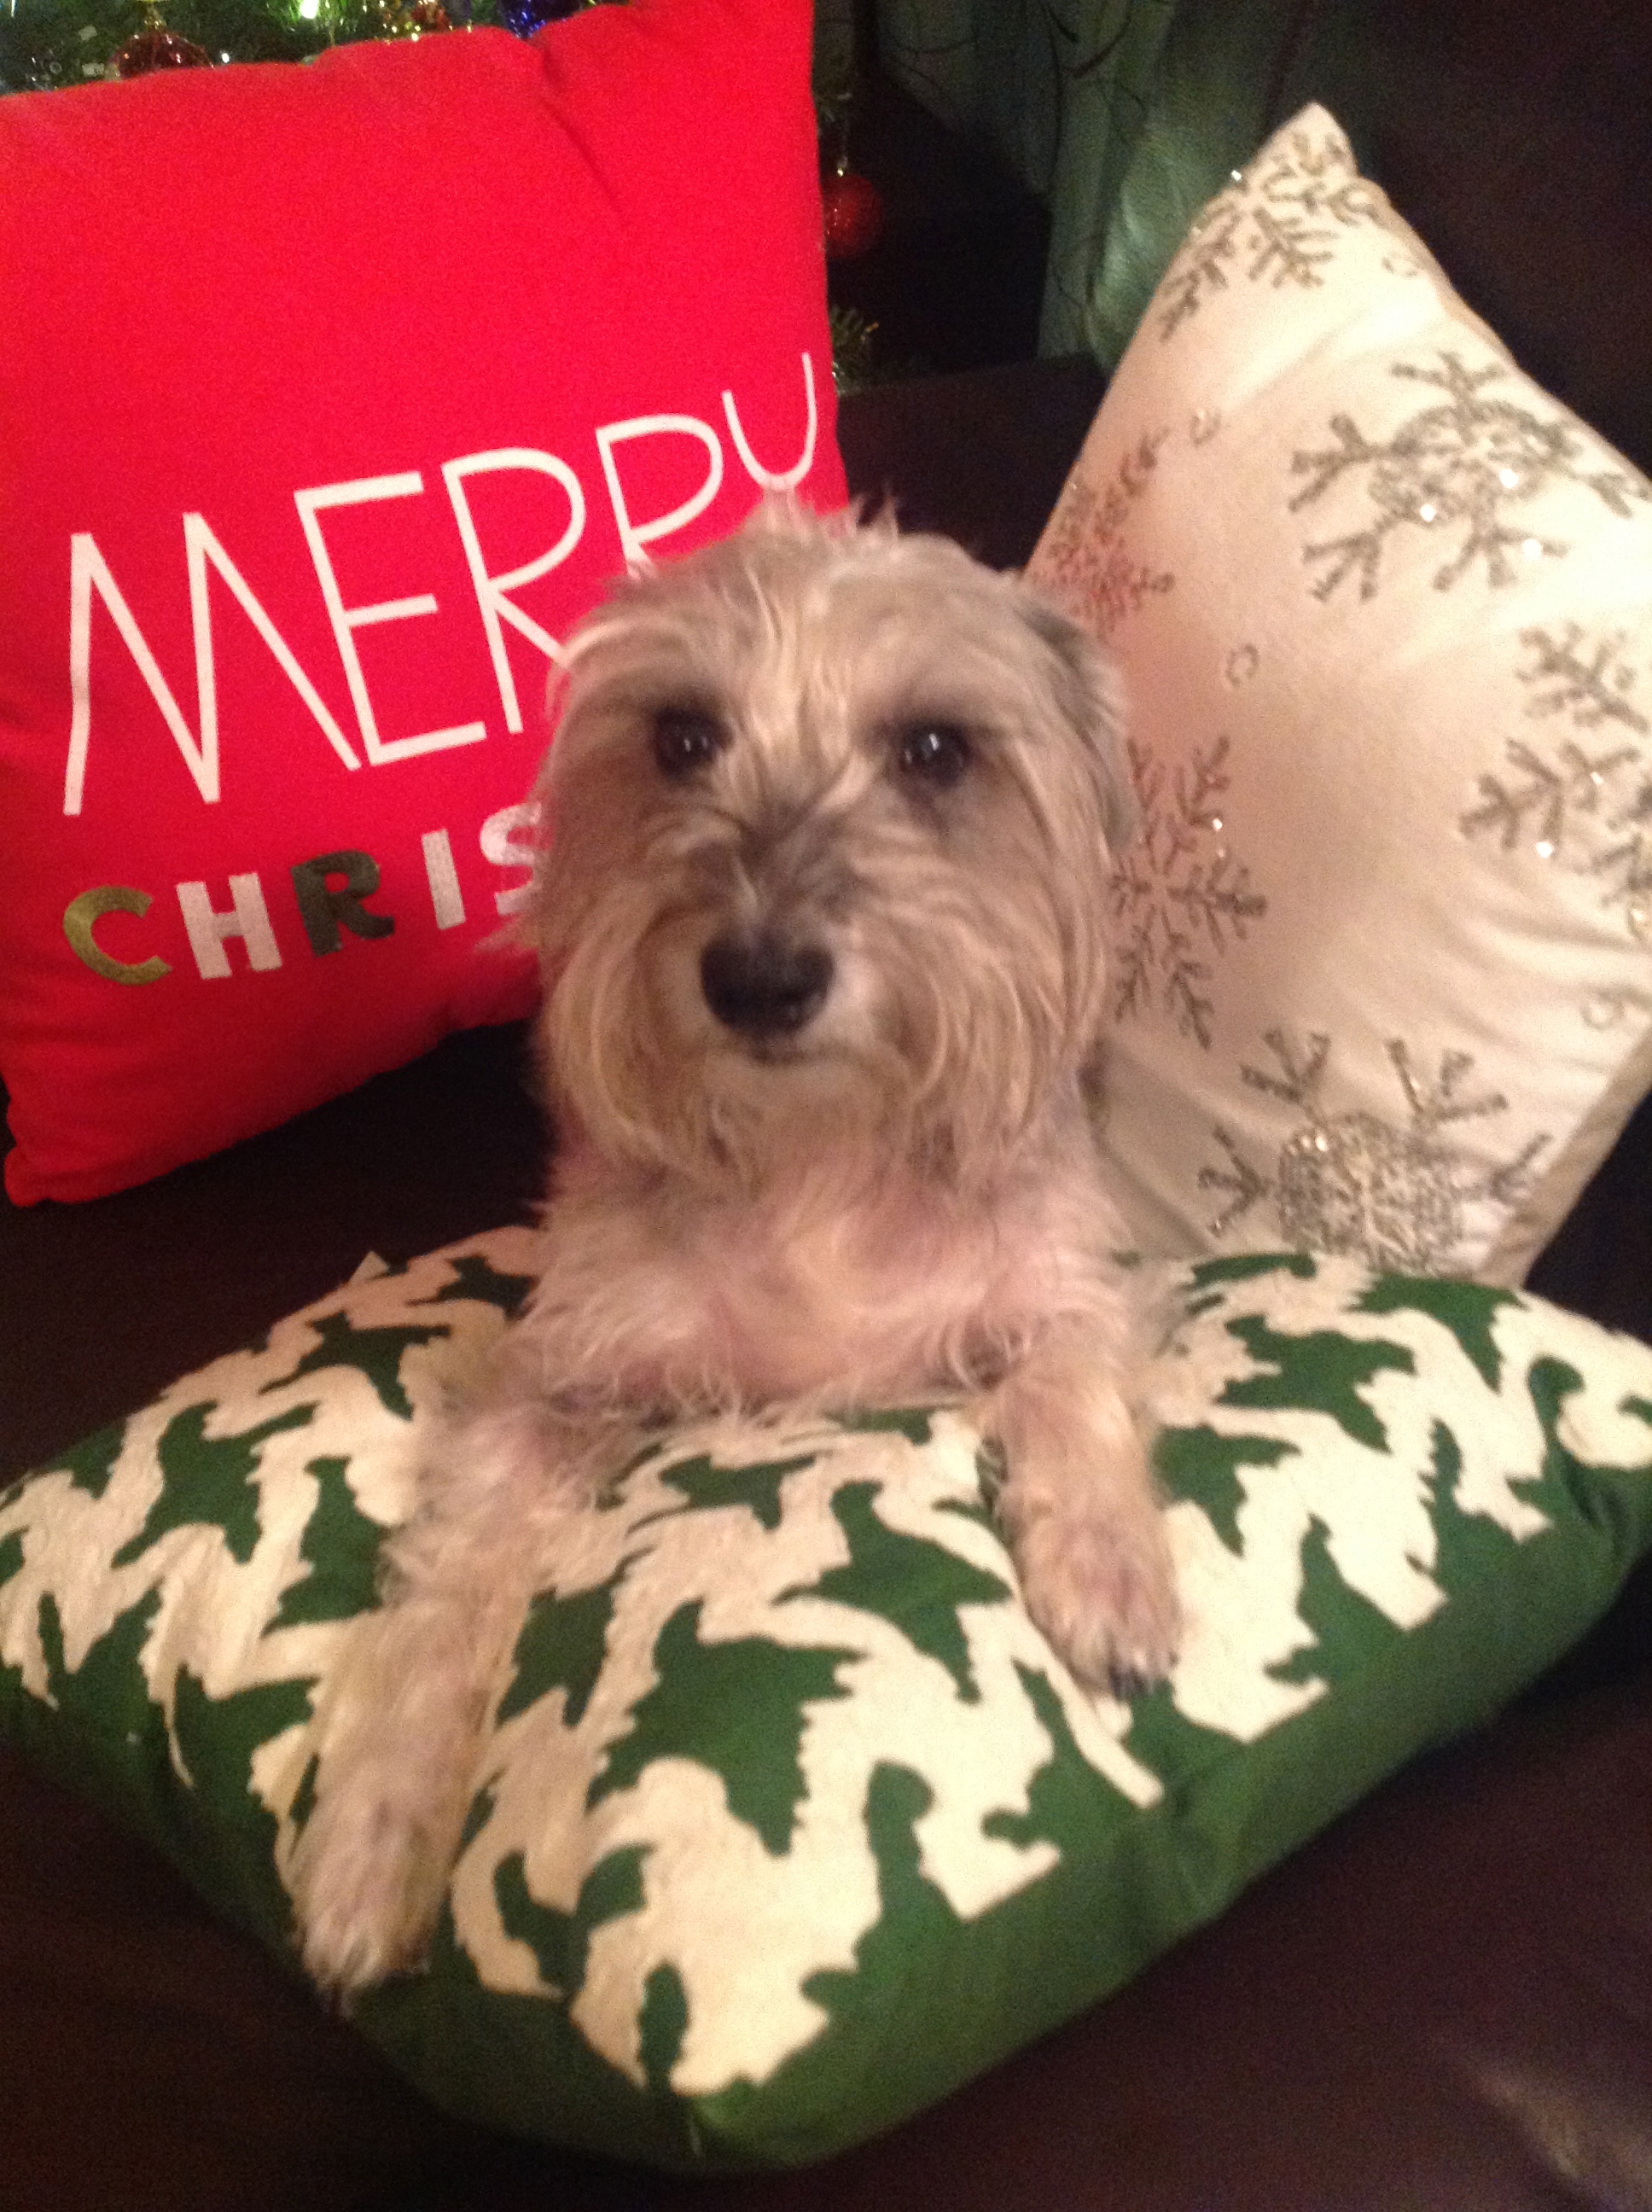 the new Holiday pillows,Riley liked it too!